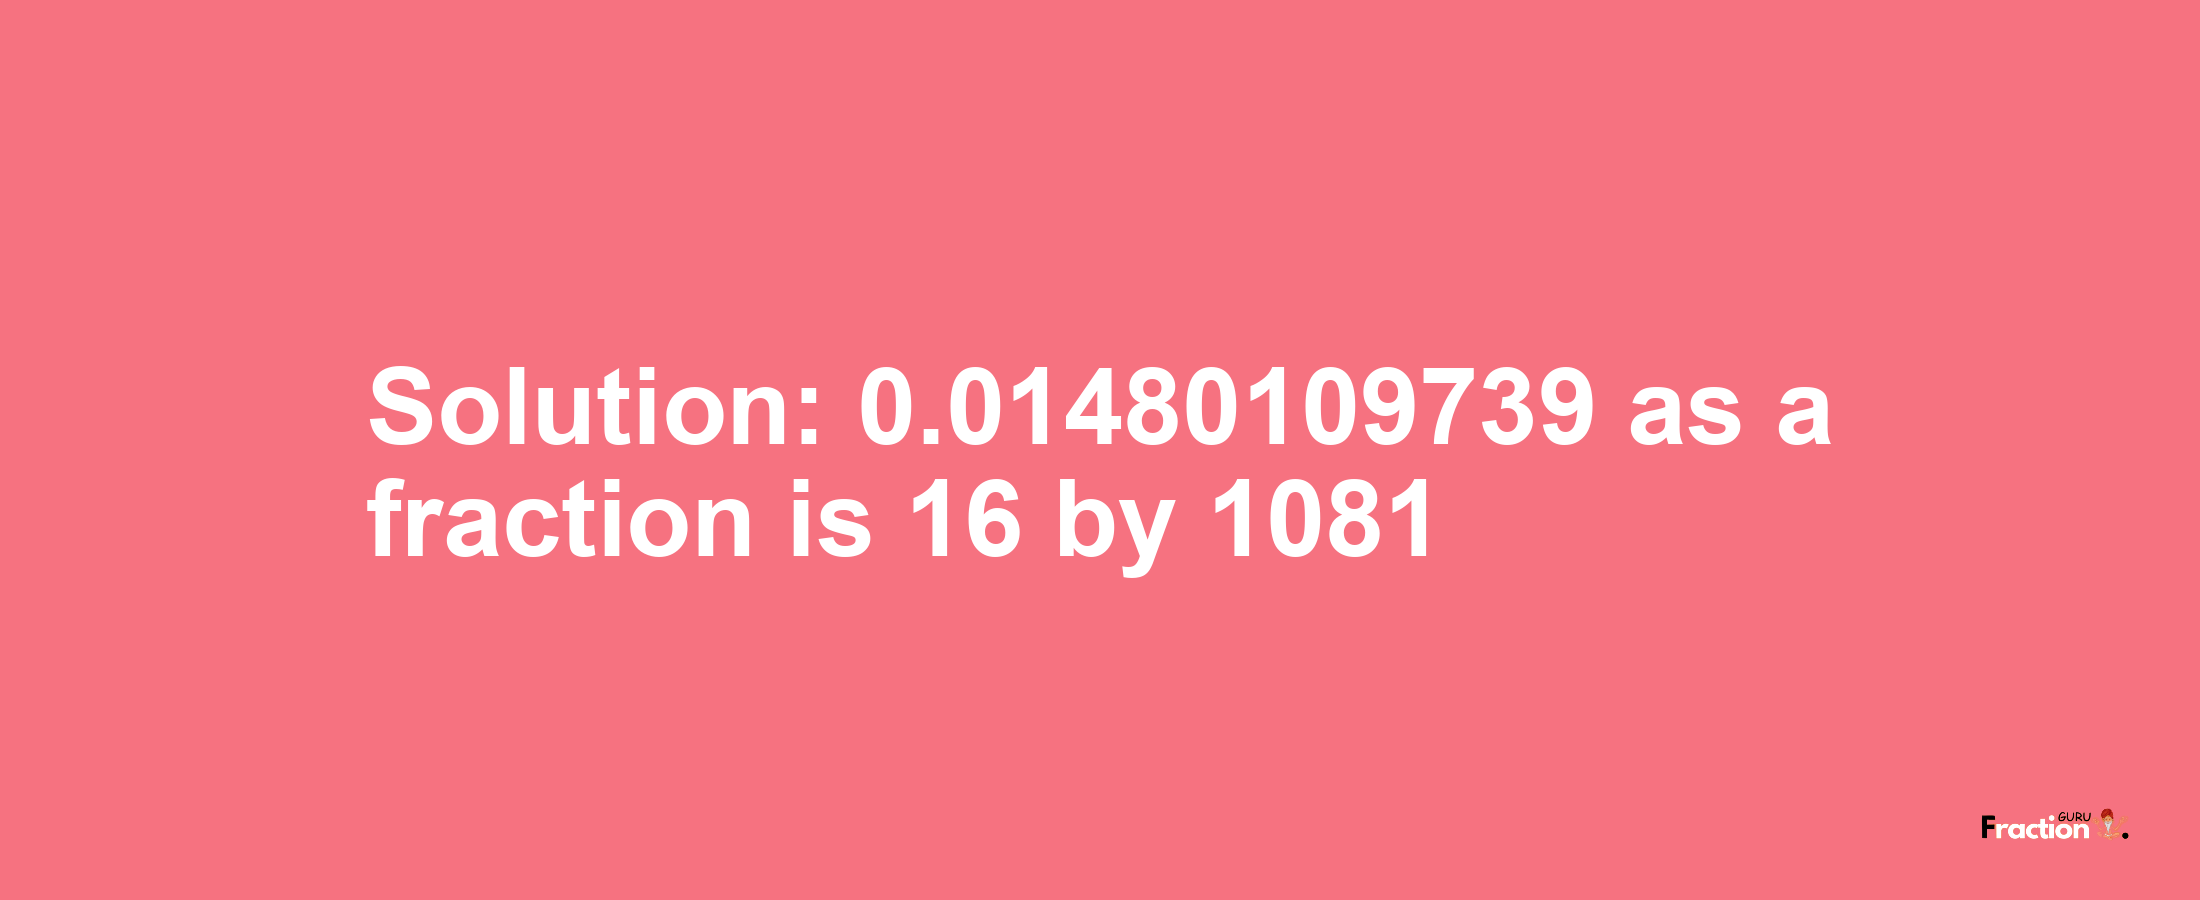 Solution:0.01480109739 as a fraction is 16/1081